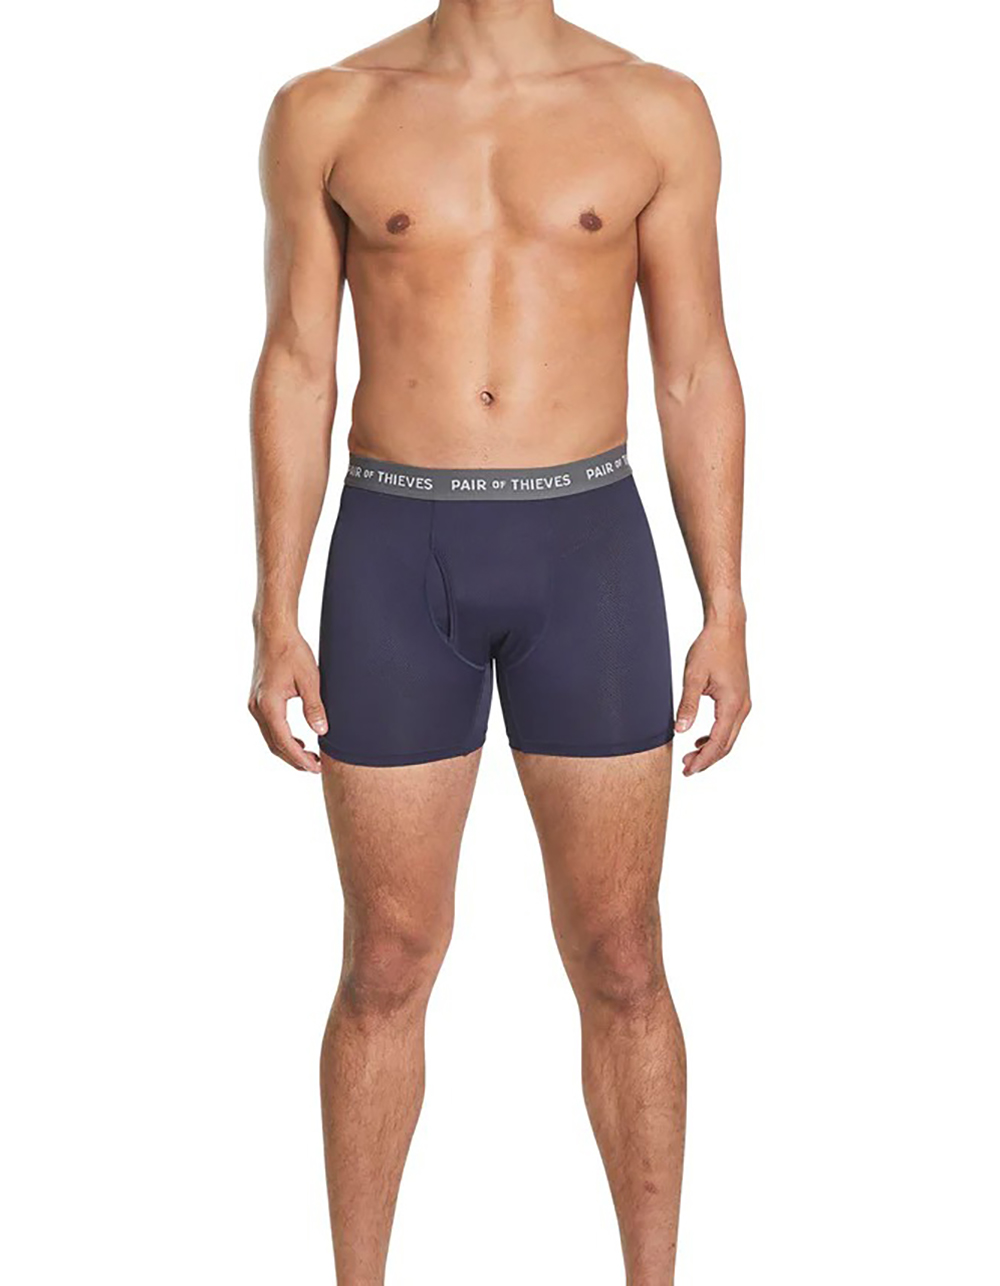 Pair of Thieves Superfit Long Boxer Brief